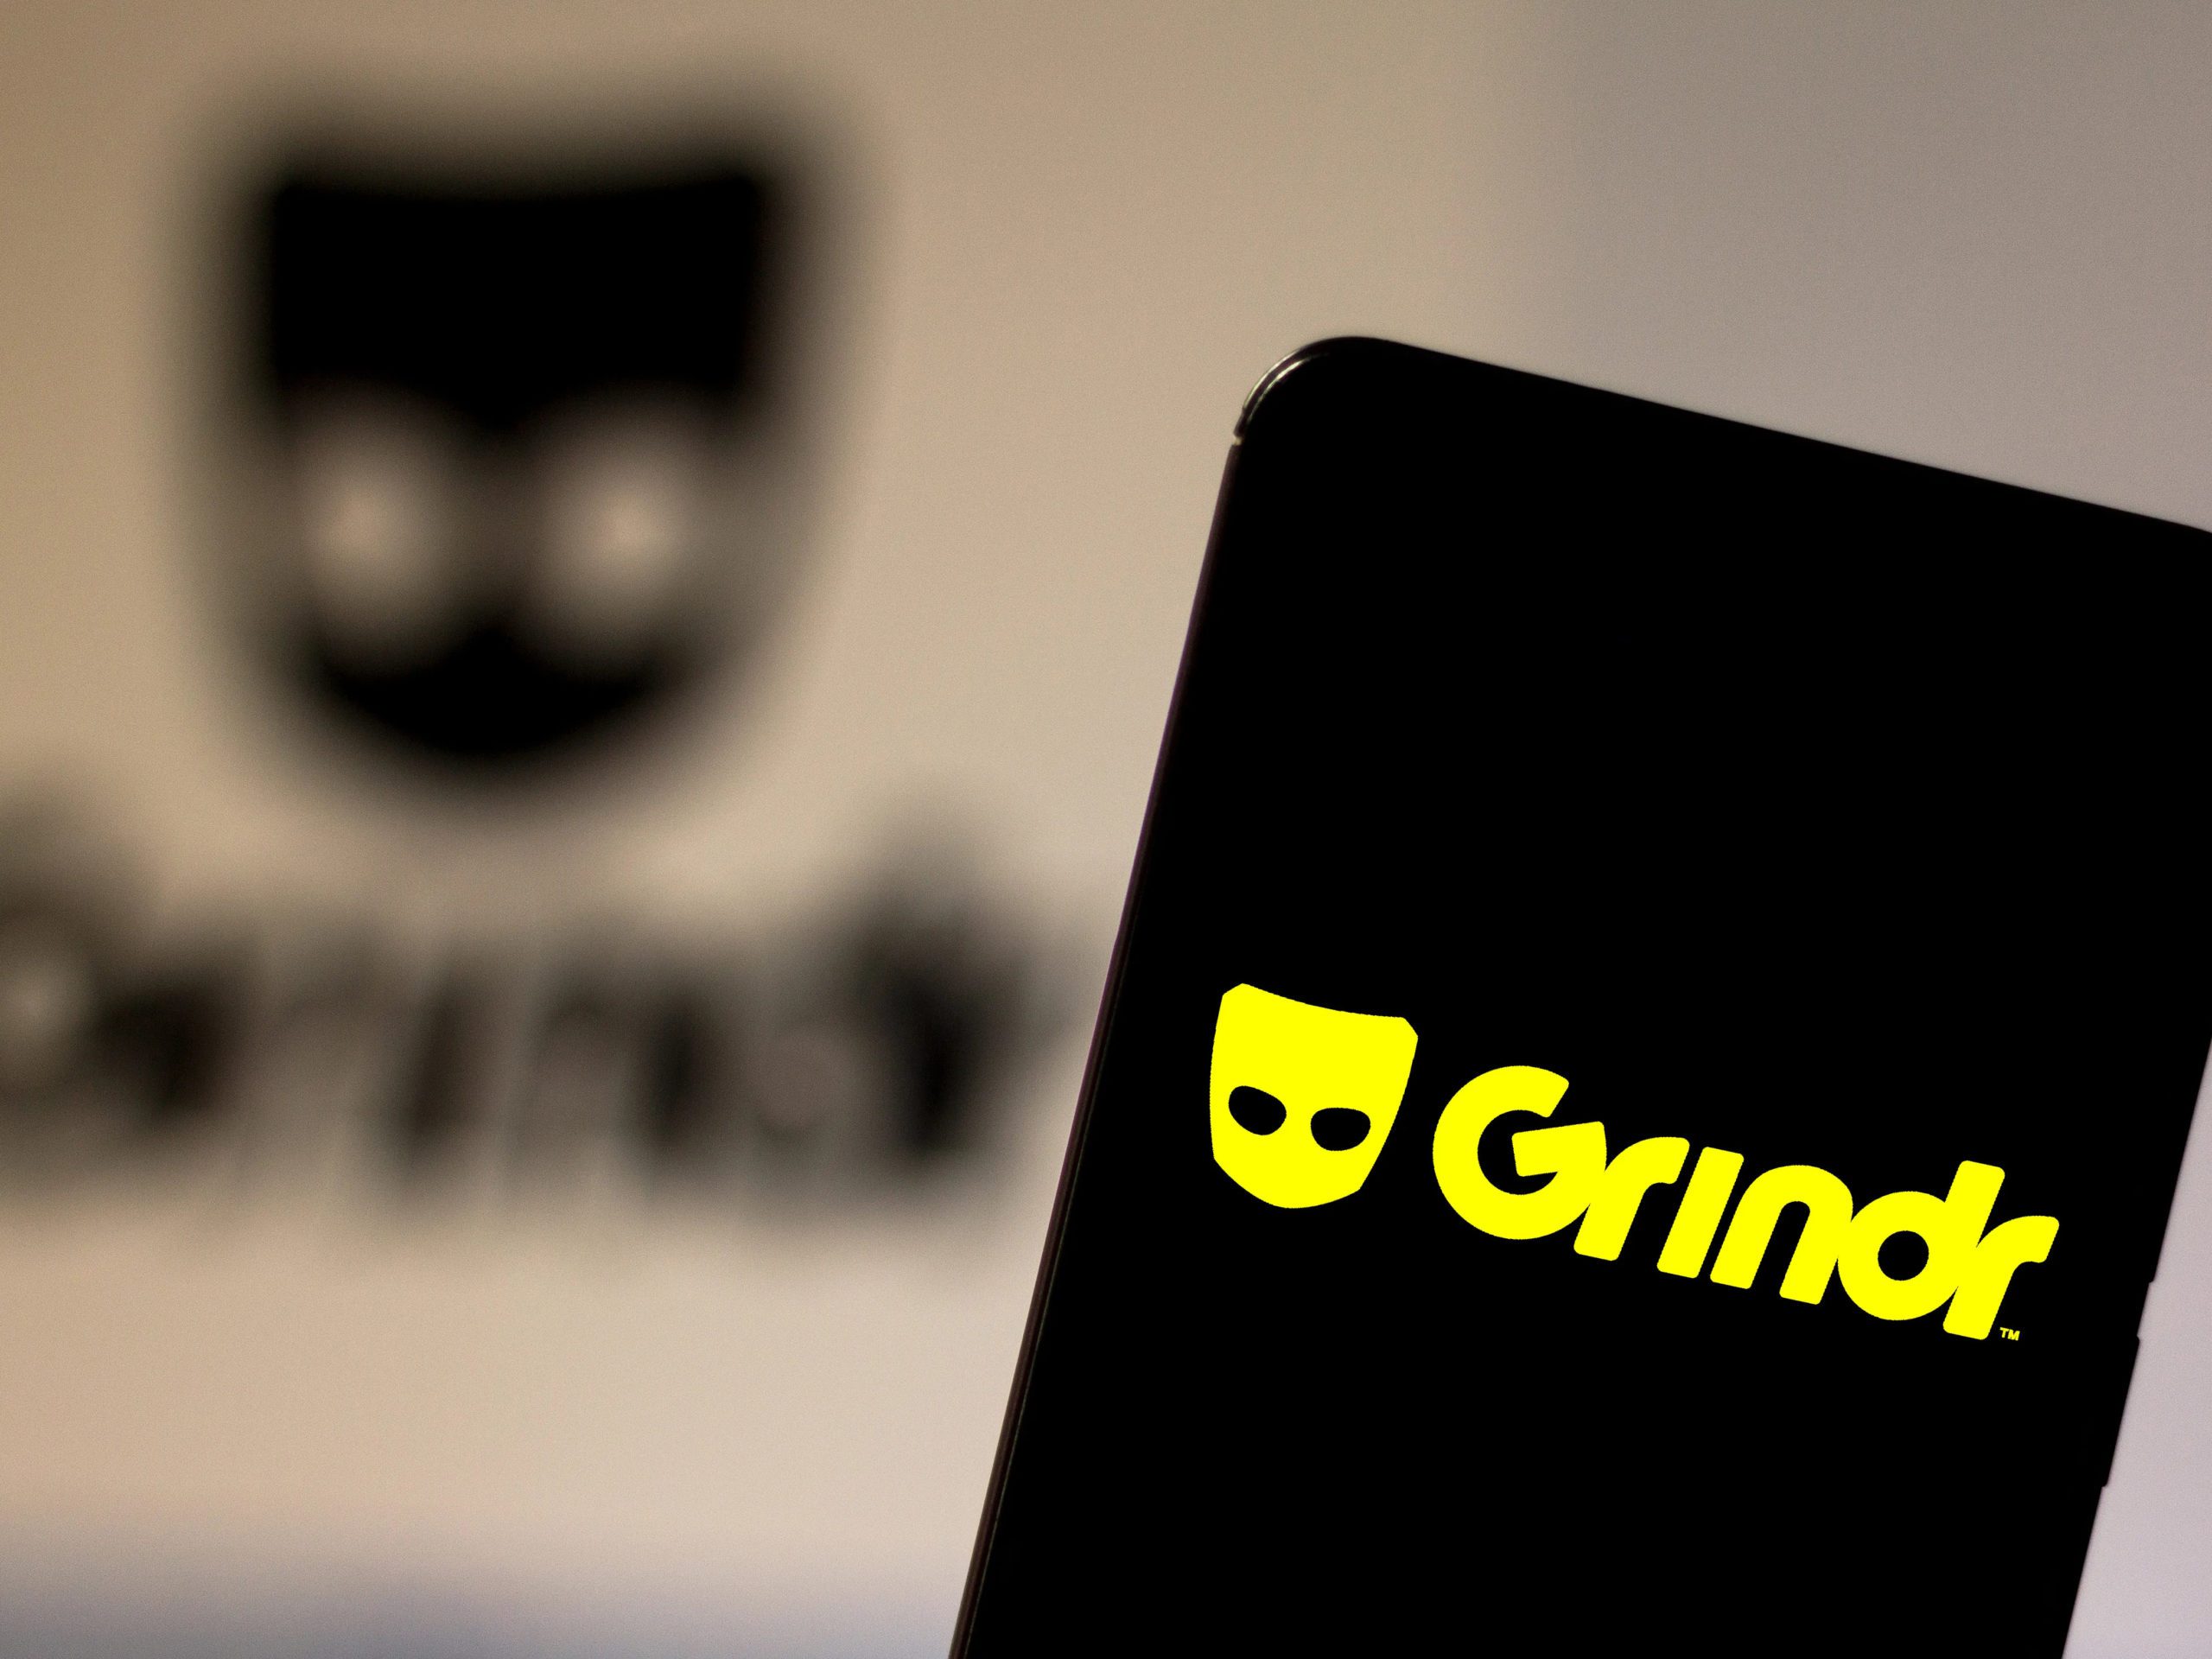 Grindr Faces UK Lawsuit Over Alleged Sharing of HIV Data: Hear what our experts have to say about this breach.